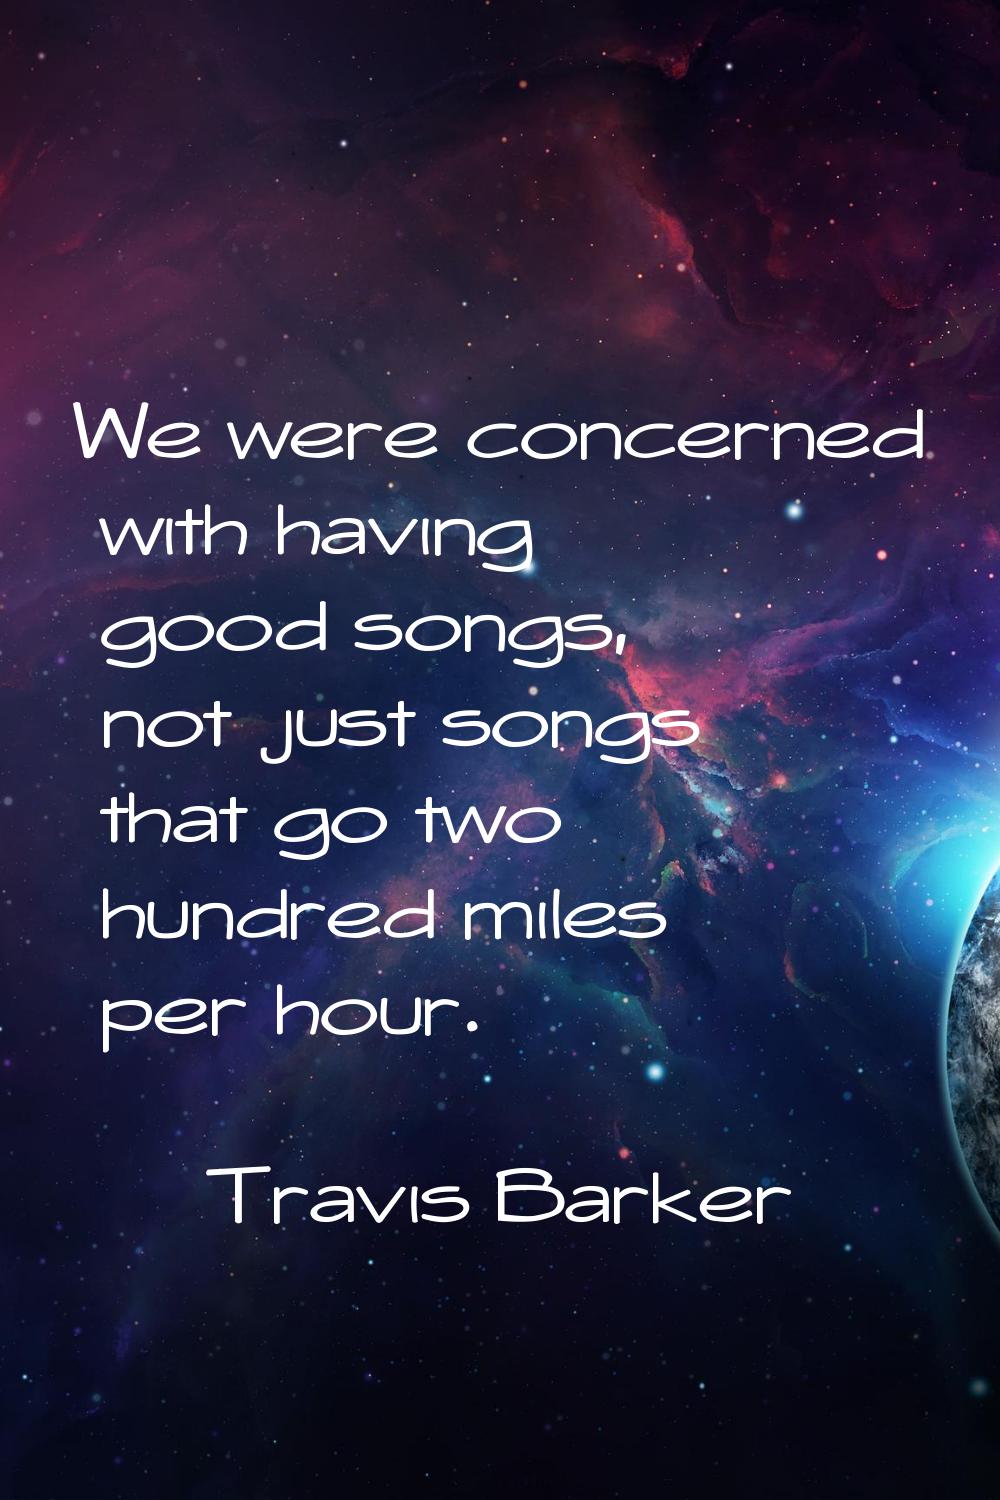 We were concerned with having good songs, not just songs that go two hundred miles per hour.